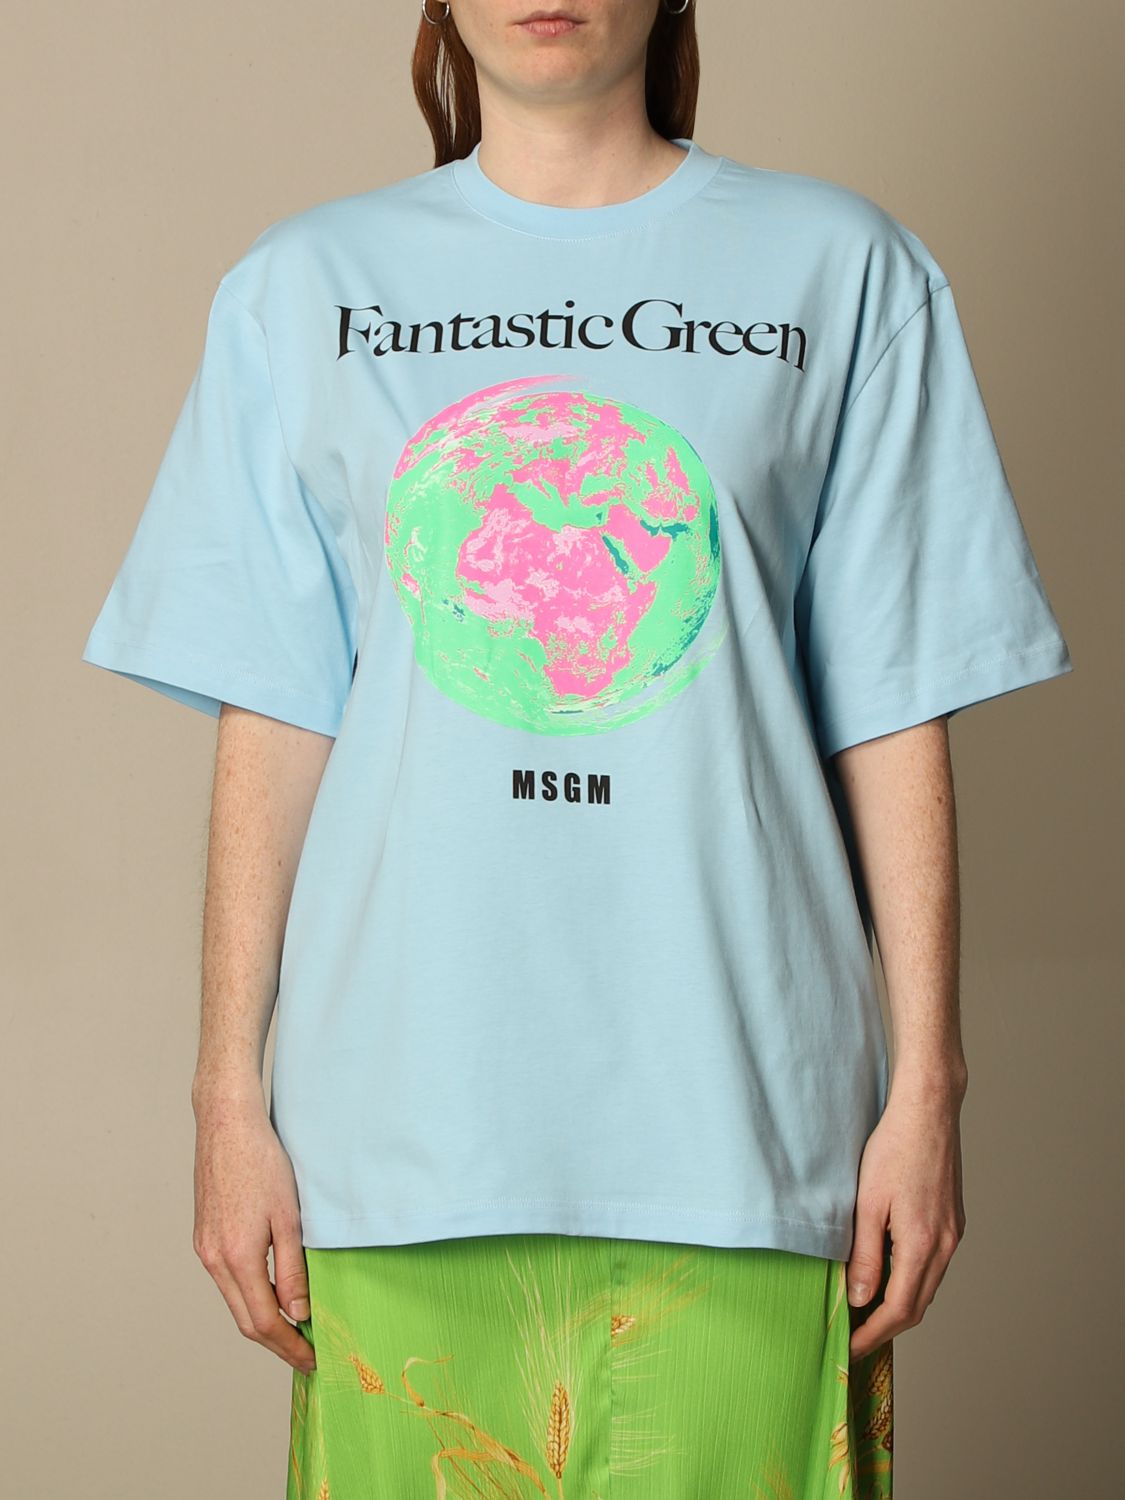 Msgm cotton T-shirt with Fantastic Green print